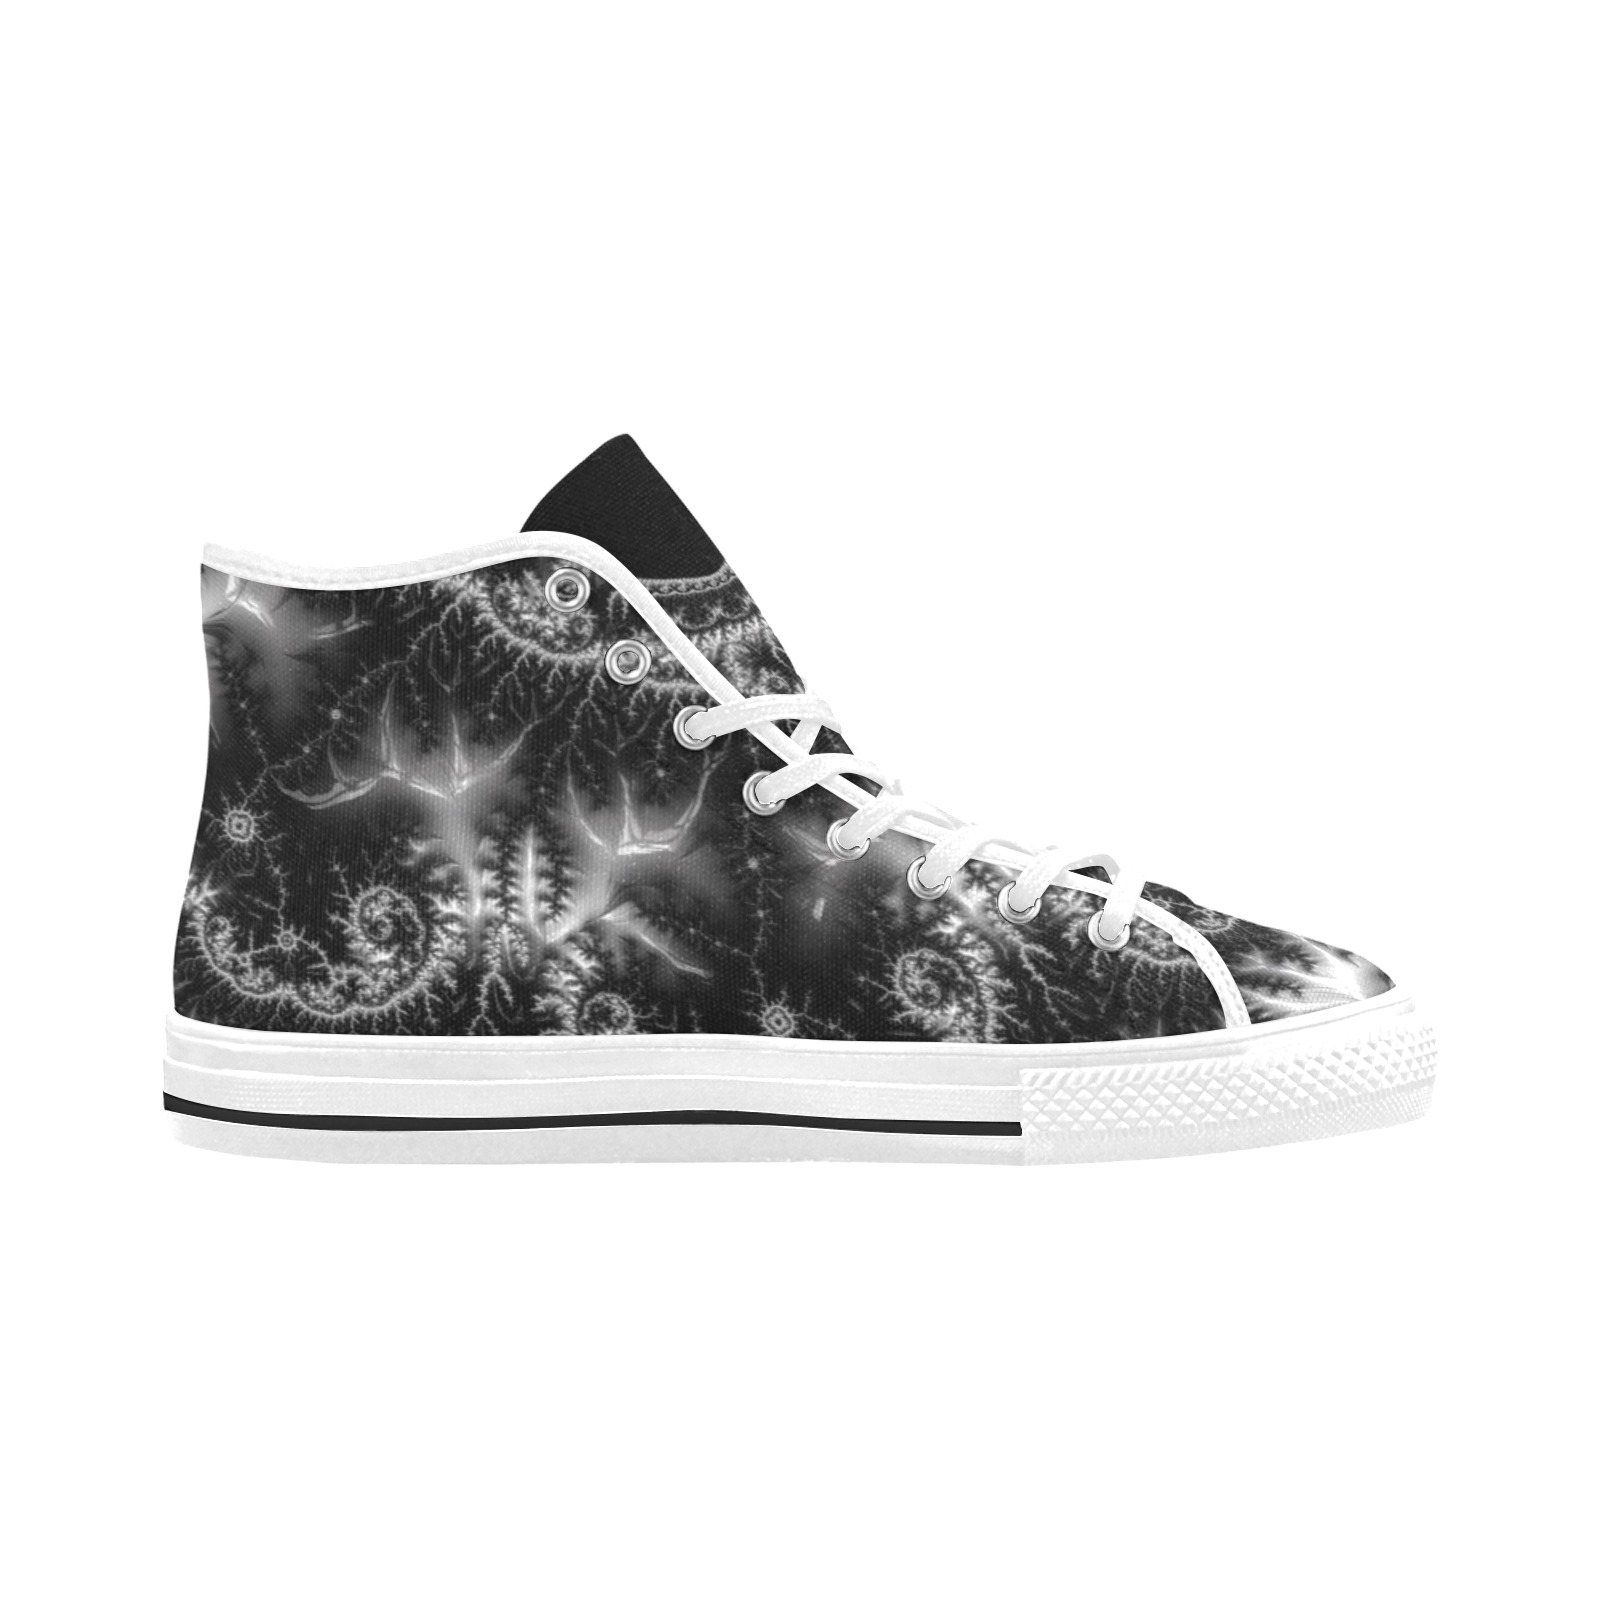 Silver Lace Collar Fractal Abstract Vancouver H Women's Canvas Shoes (1013-1)